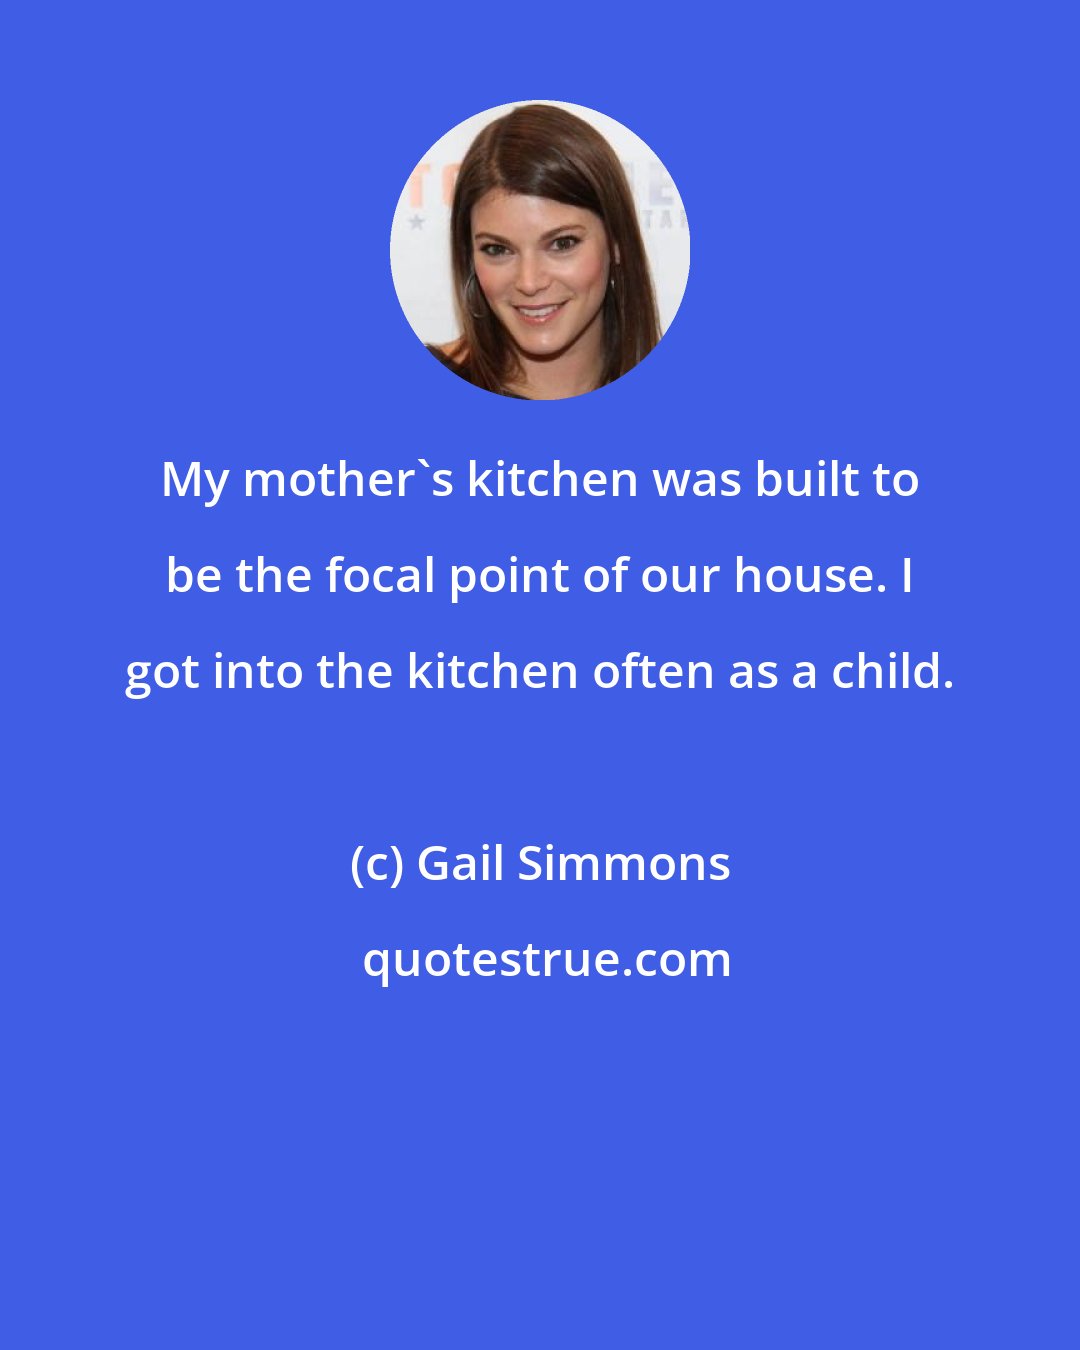 Gail Simmons: My mother's kitchen was built to be the focal point of our house. I got into the kitchen often as a child.